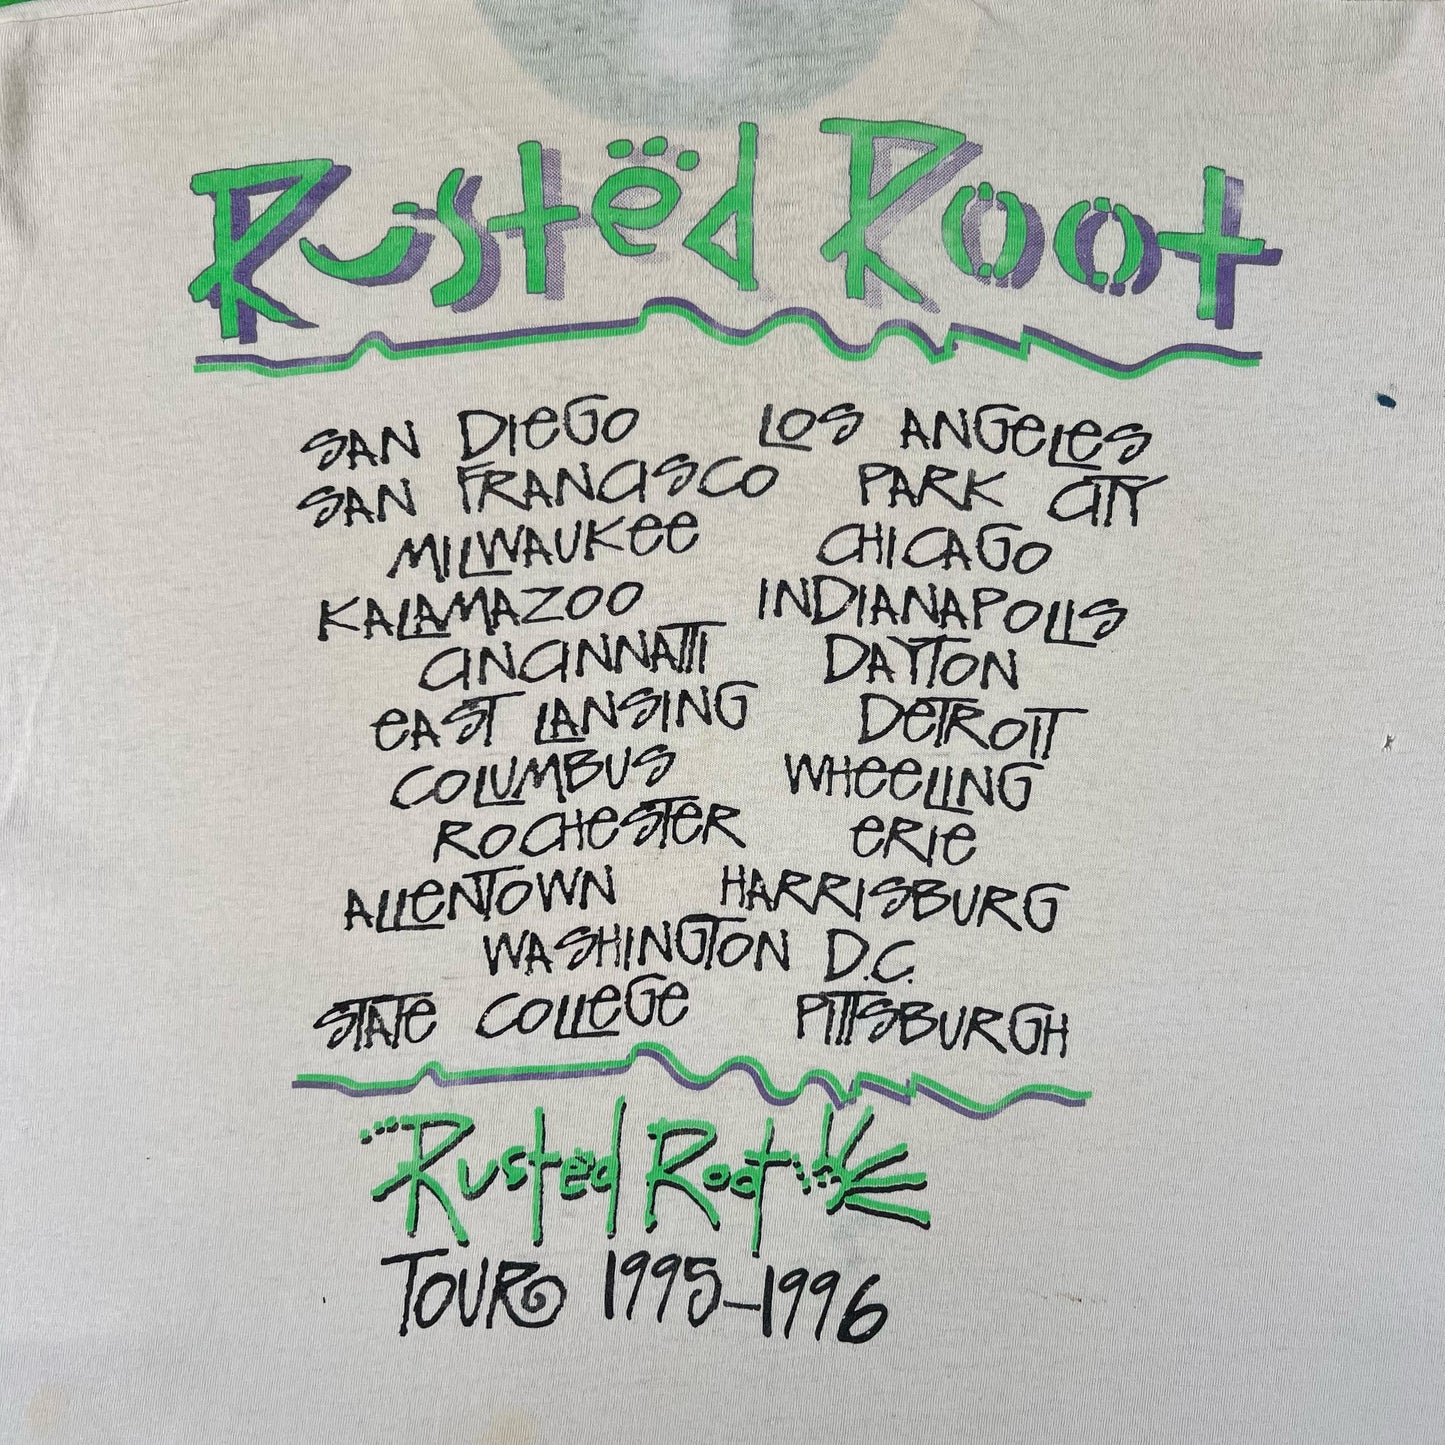 90s Rusted Root Thrashed Band Tee- XL